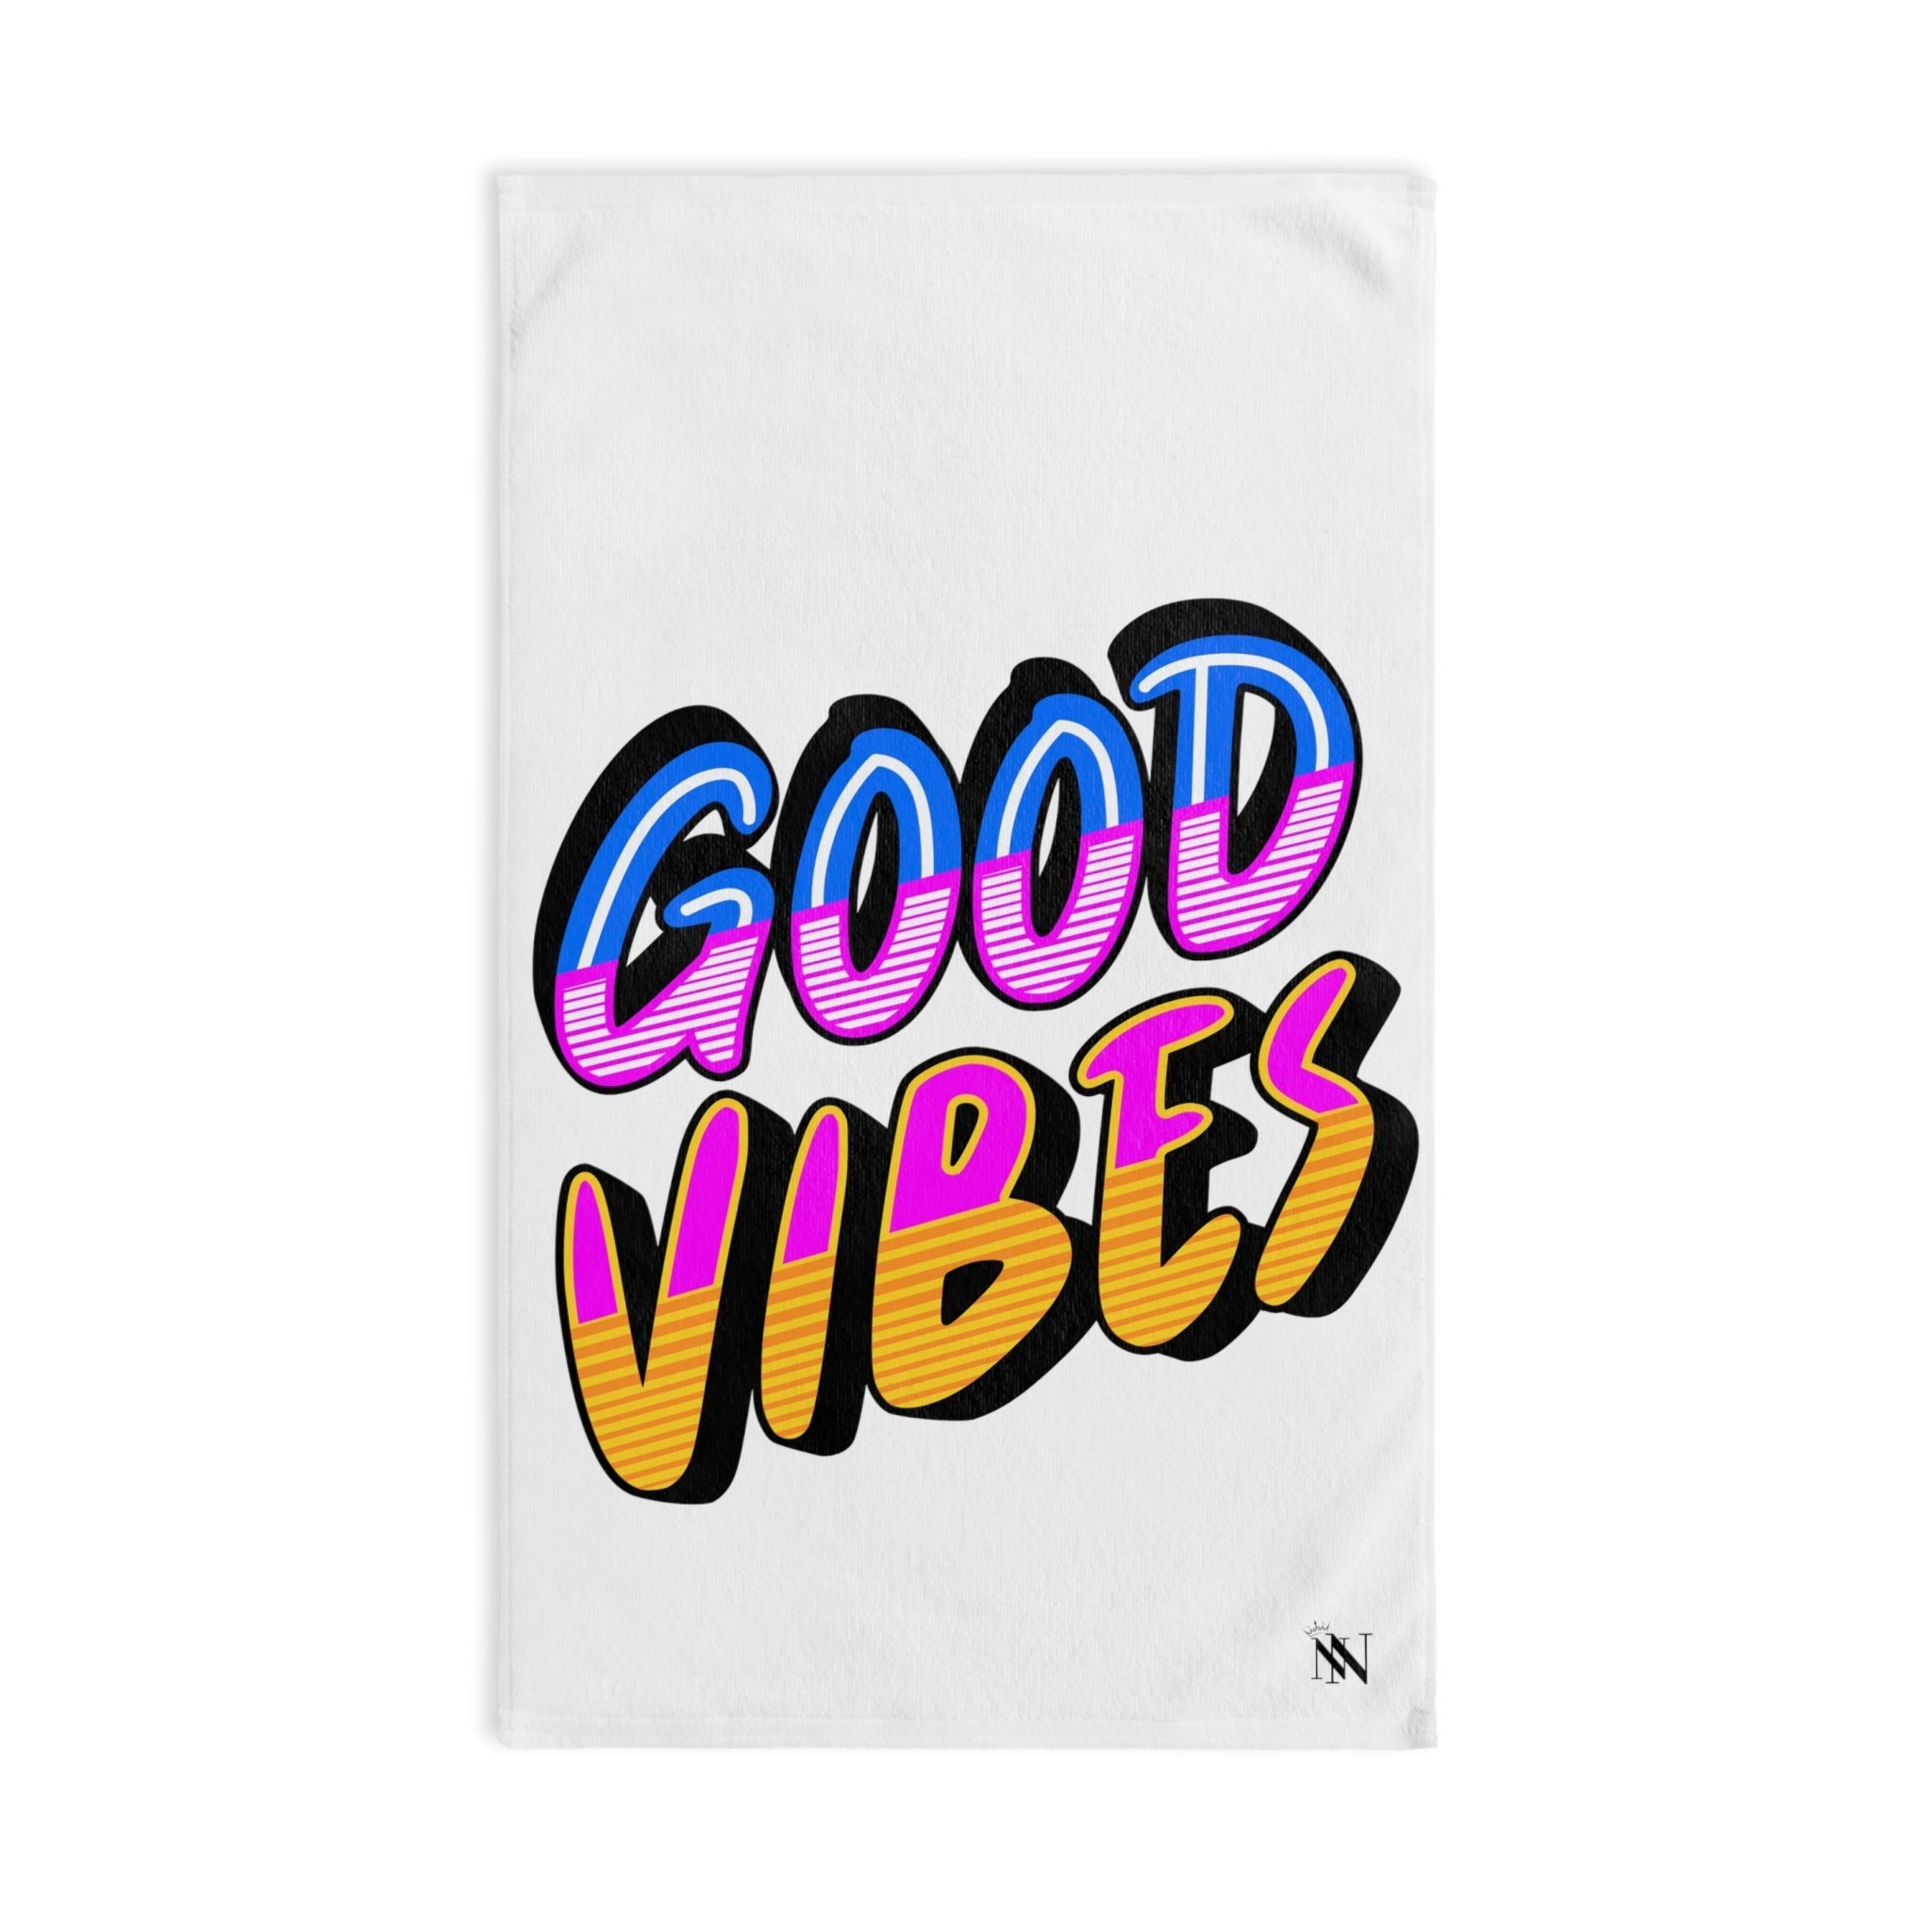 Neon Rainbow VibesWhite | Funny Gifts for Men - Gifts for Him - Birthday Gifts for Men, Him, Her, Husband, Boyfriend, Girlfriend, New Couple Gifts, Fathers & Valentines Day Gifts, Christmas Gifts NECTAR NAPKINS